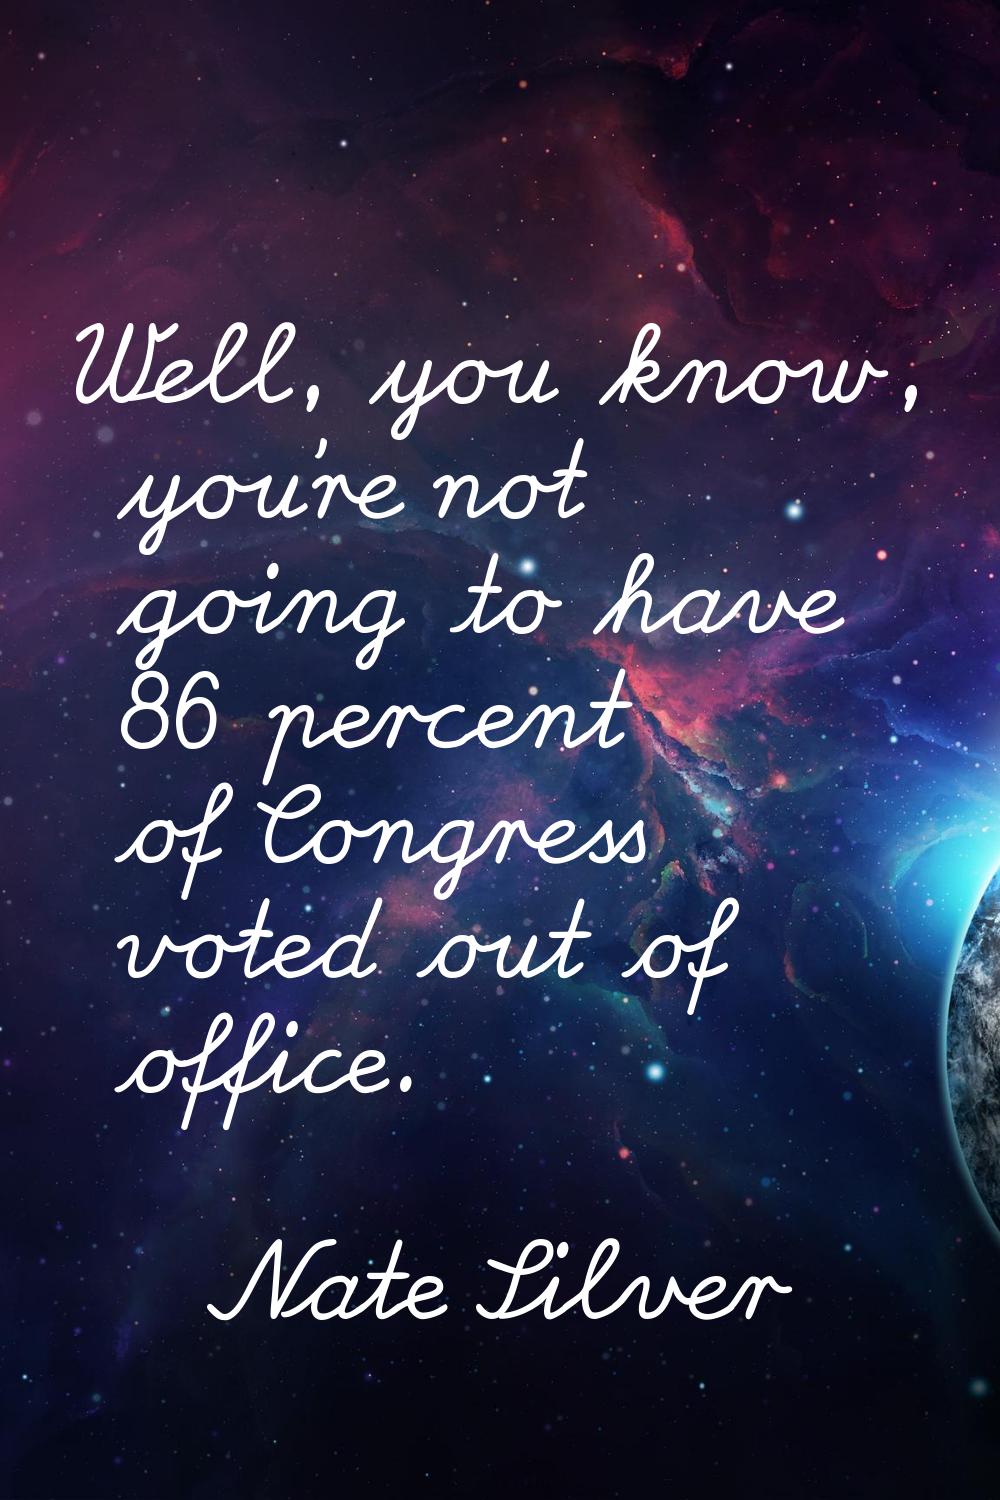 Well, you know, you're not going to have 86 percent of Congress voted out of office.